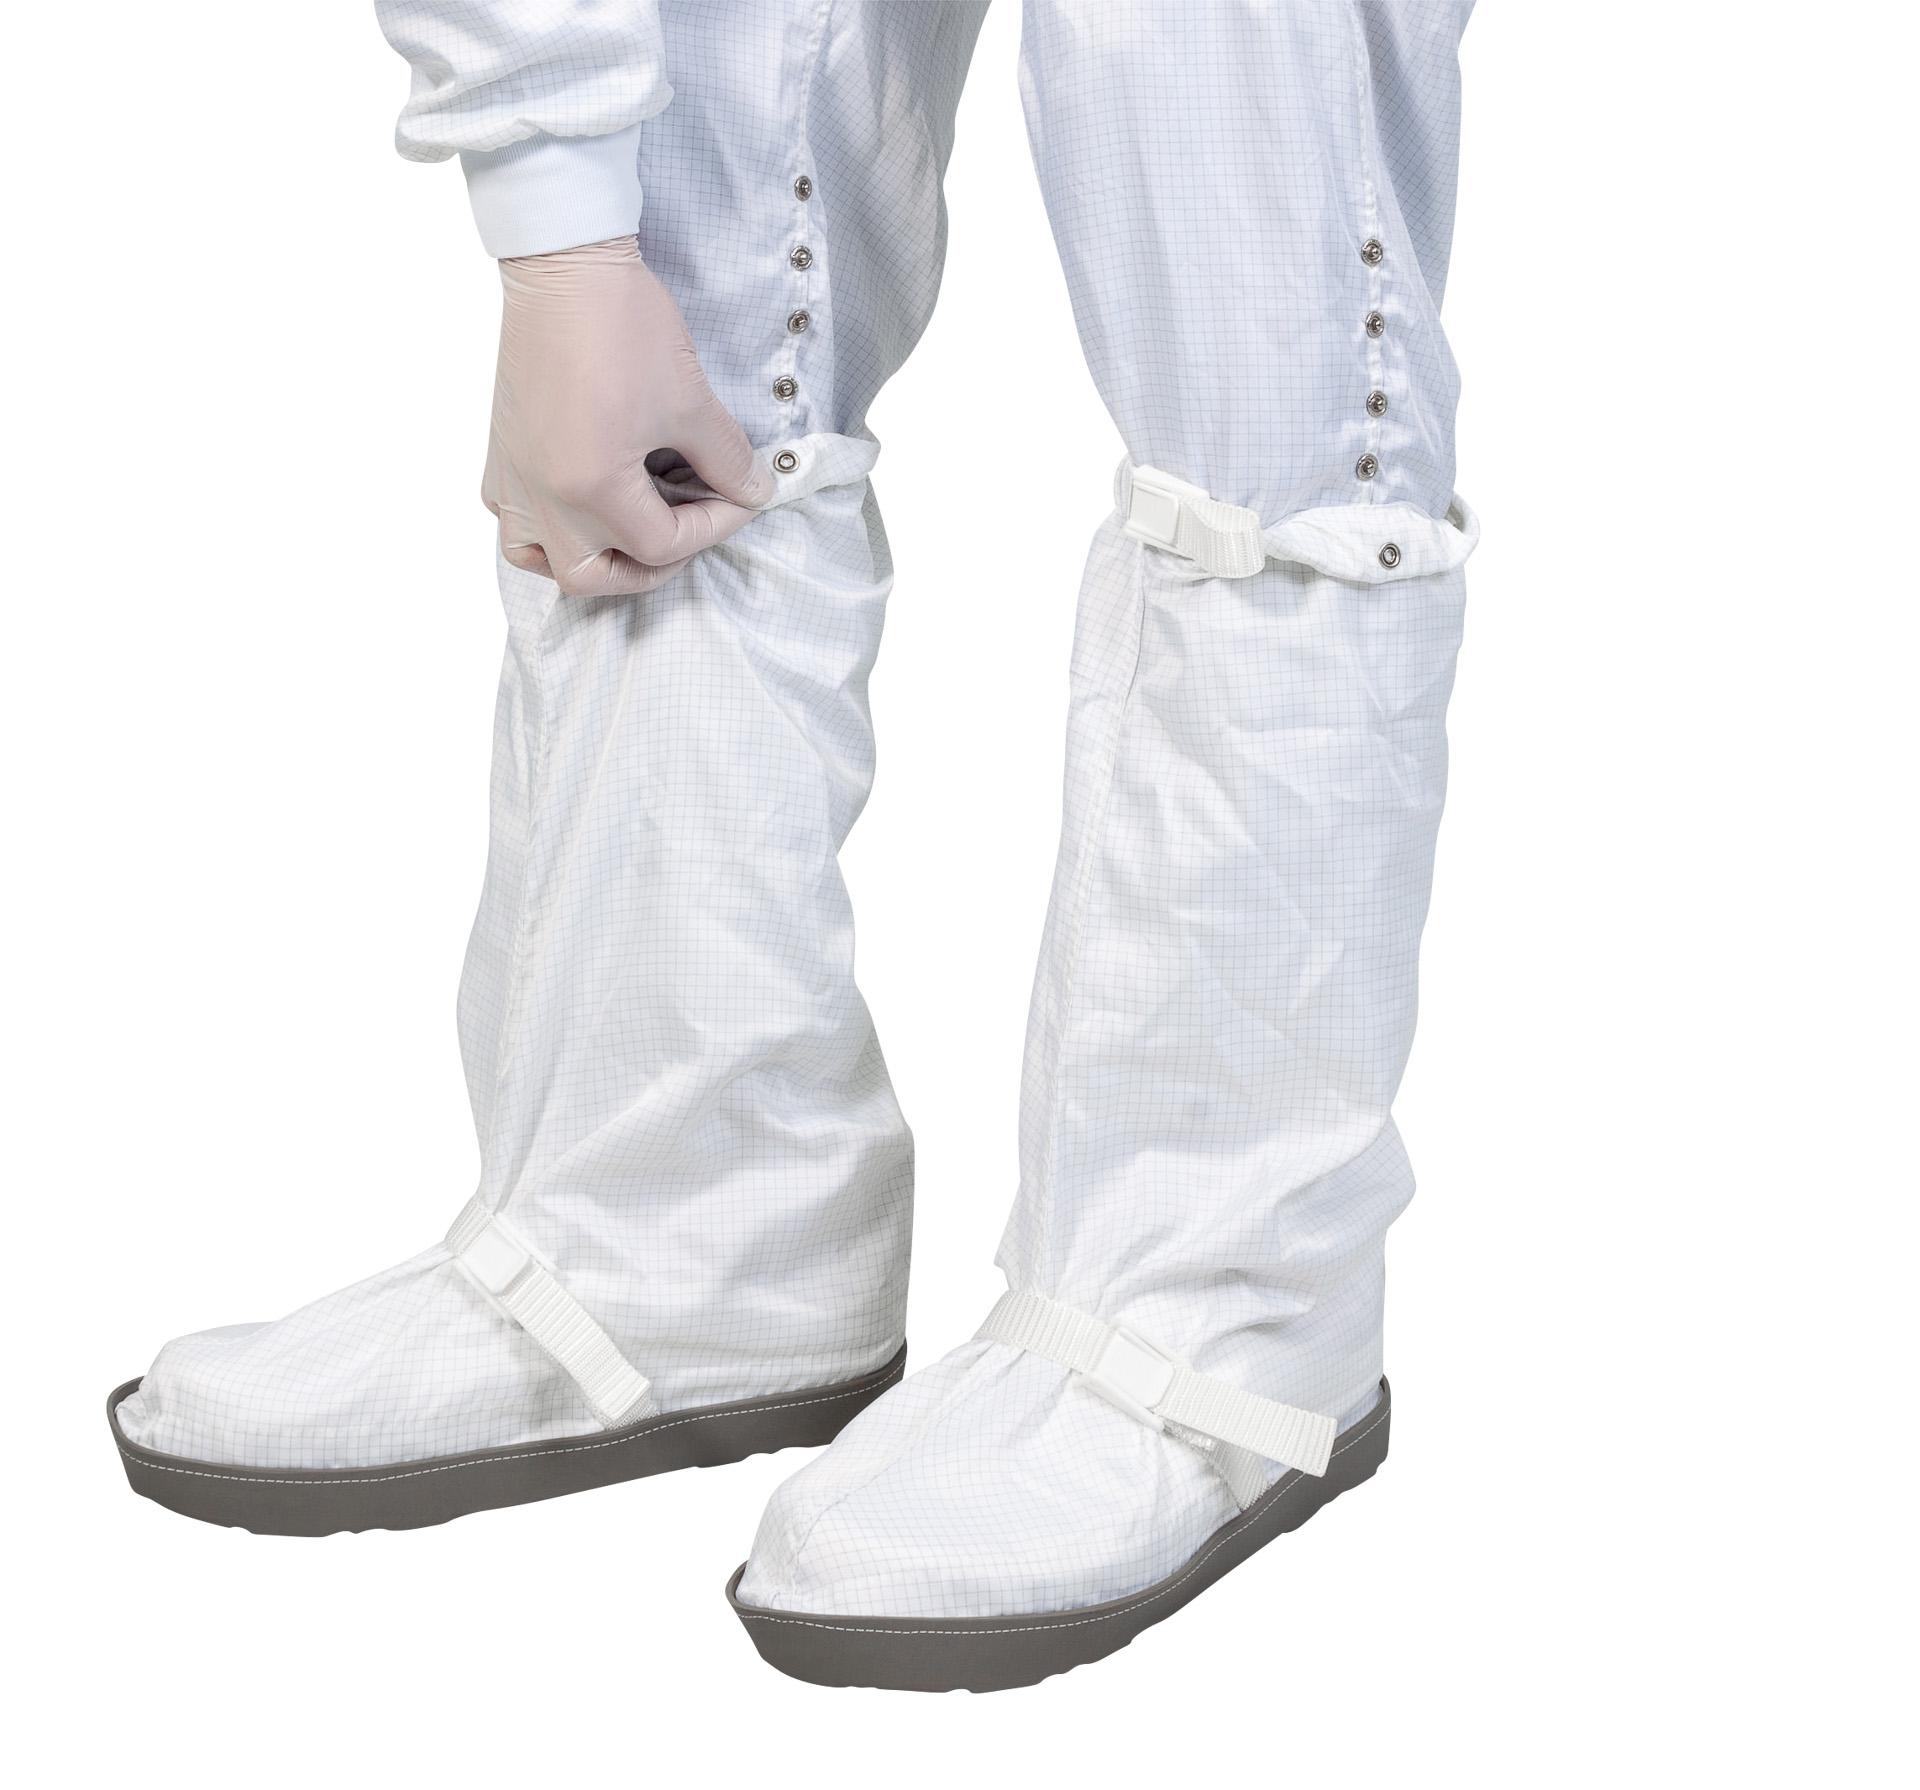 Cleanroom reusable overboots with antistatic rubber sole, for cleanroom class ISO 4-8, GMP A-C